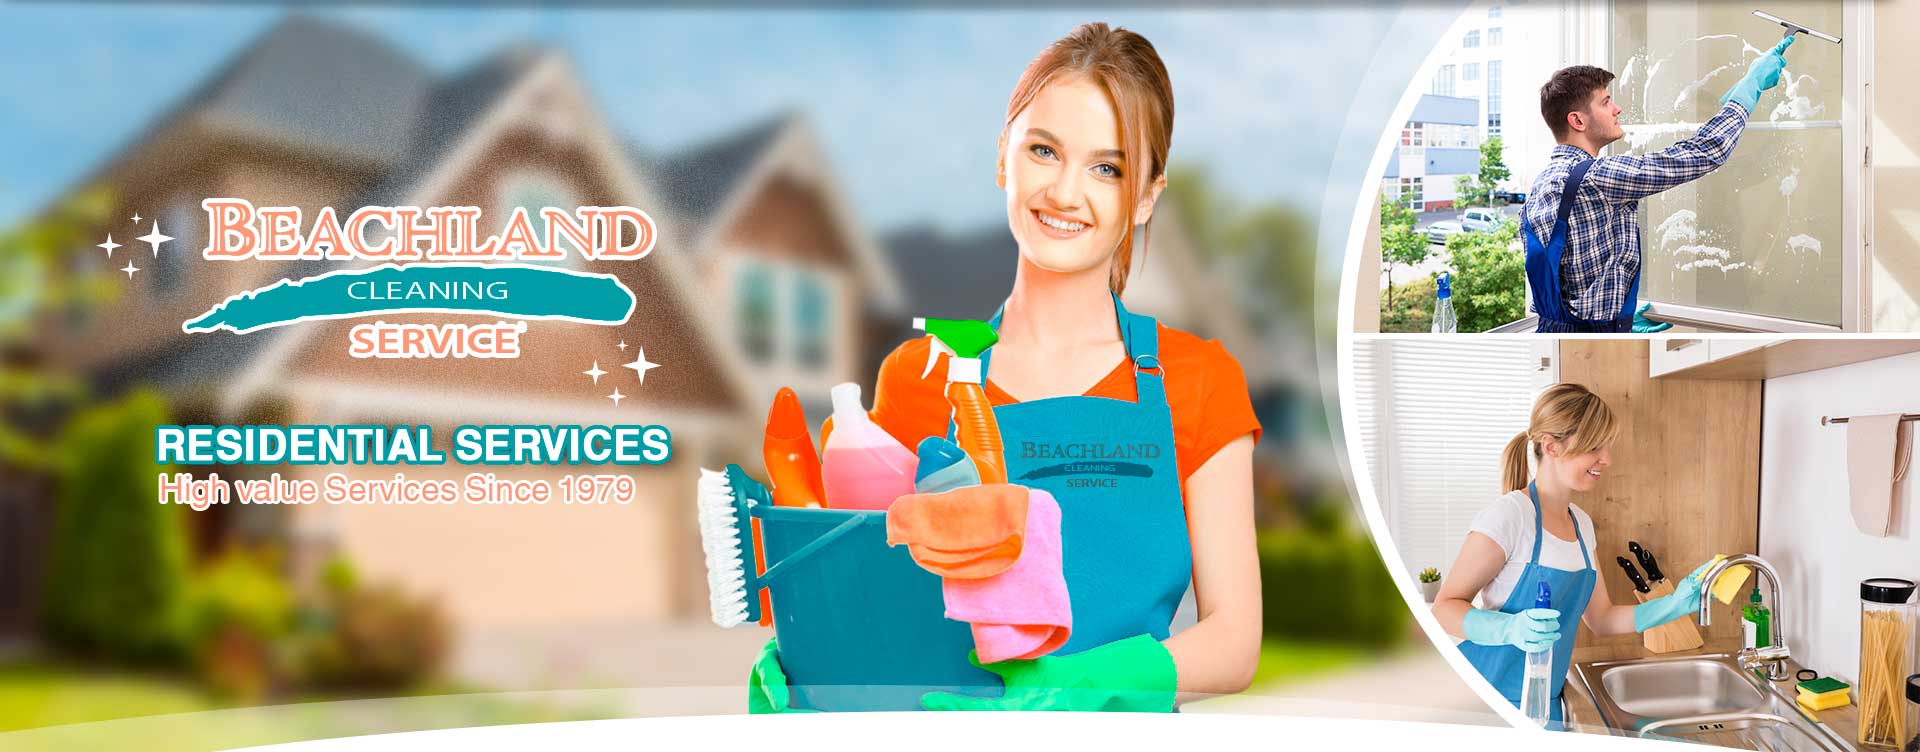 Commercial Cleaning Services in Hobe Sound